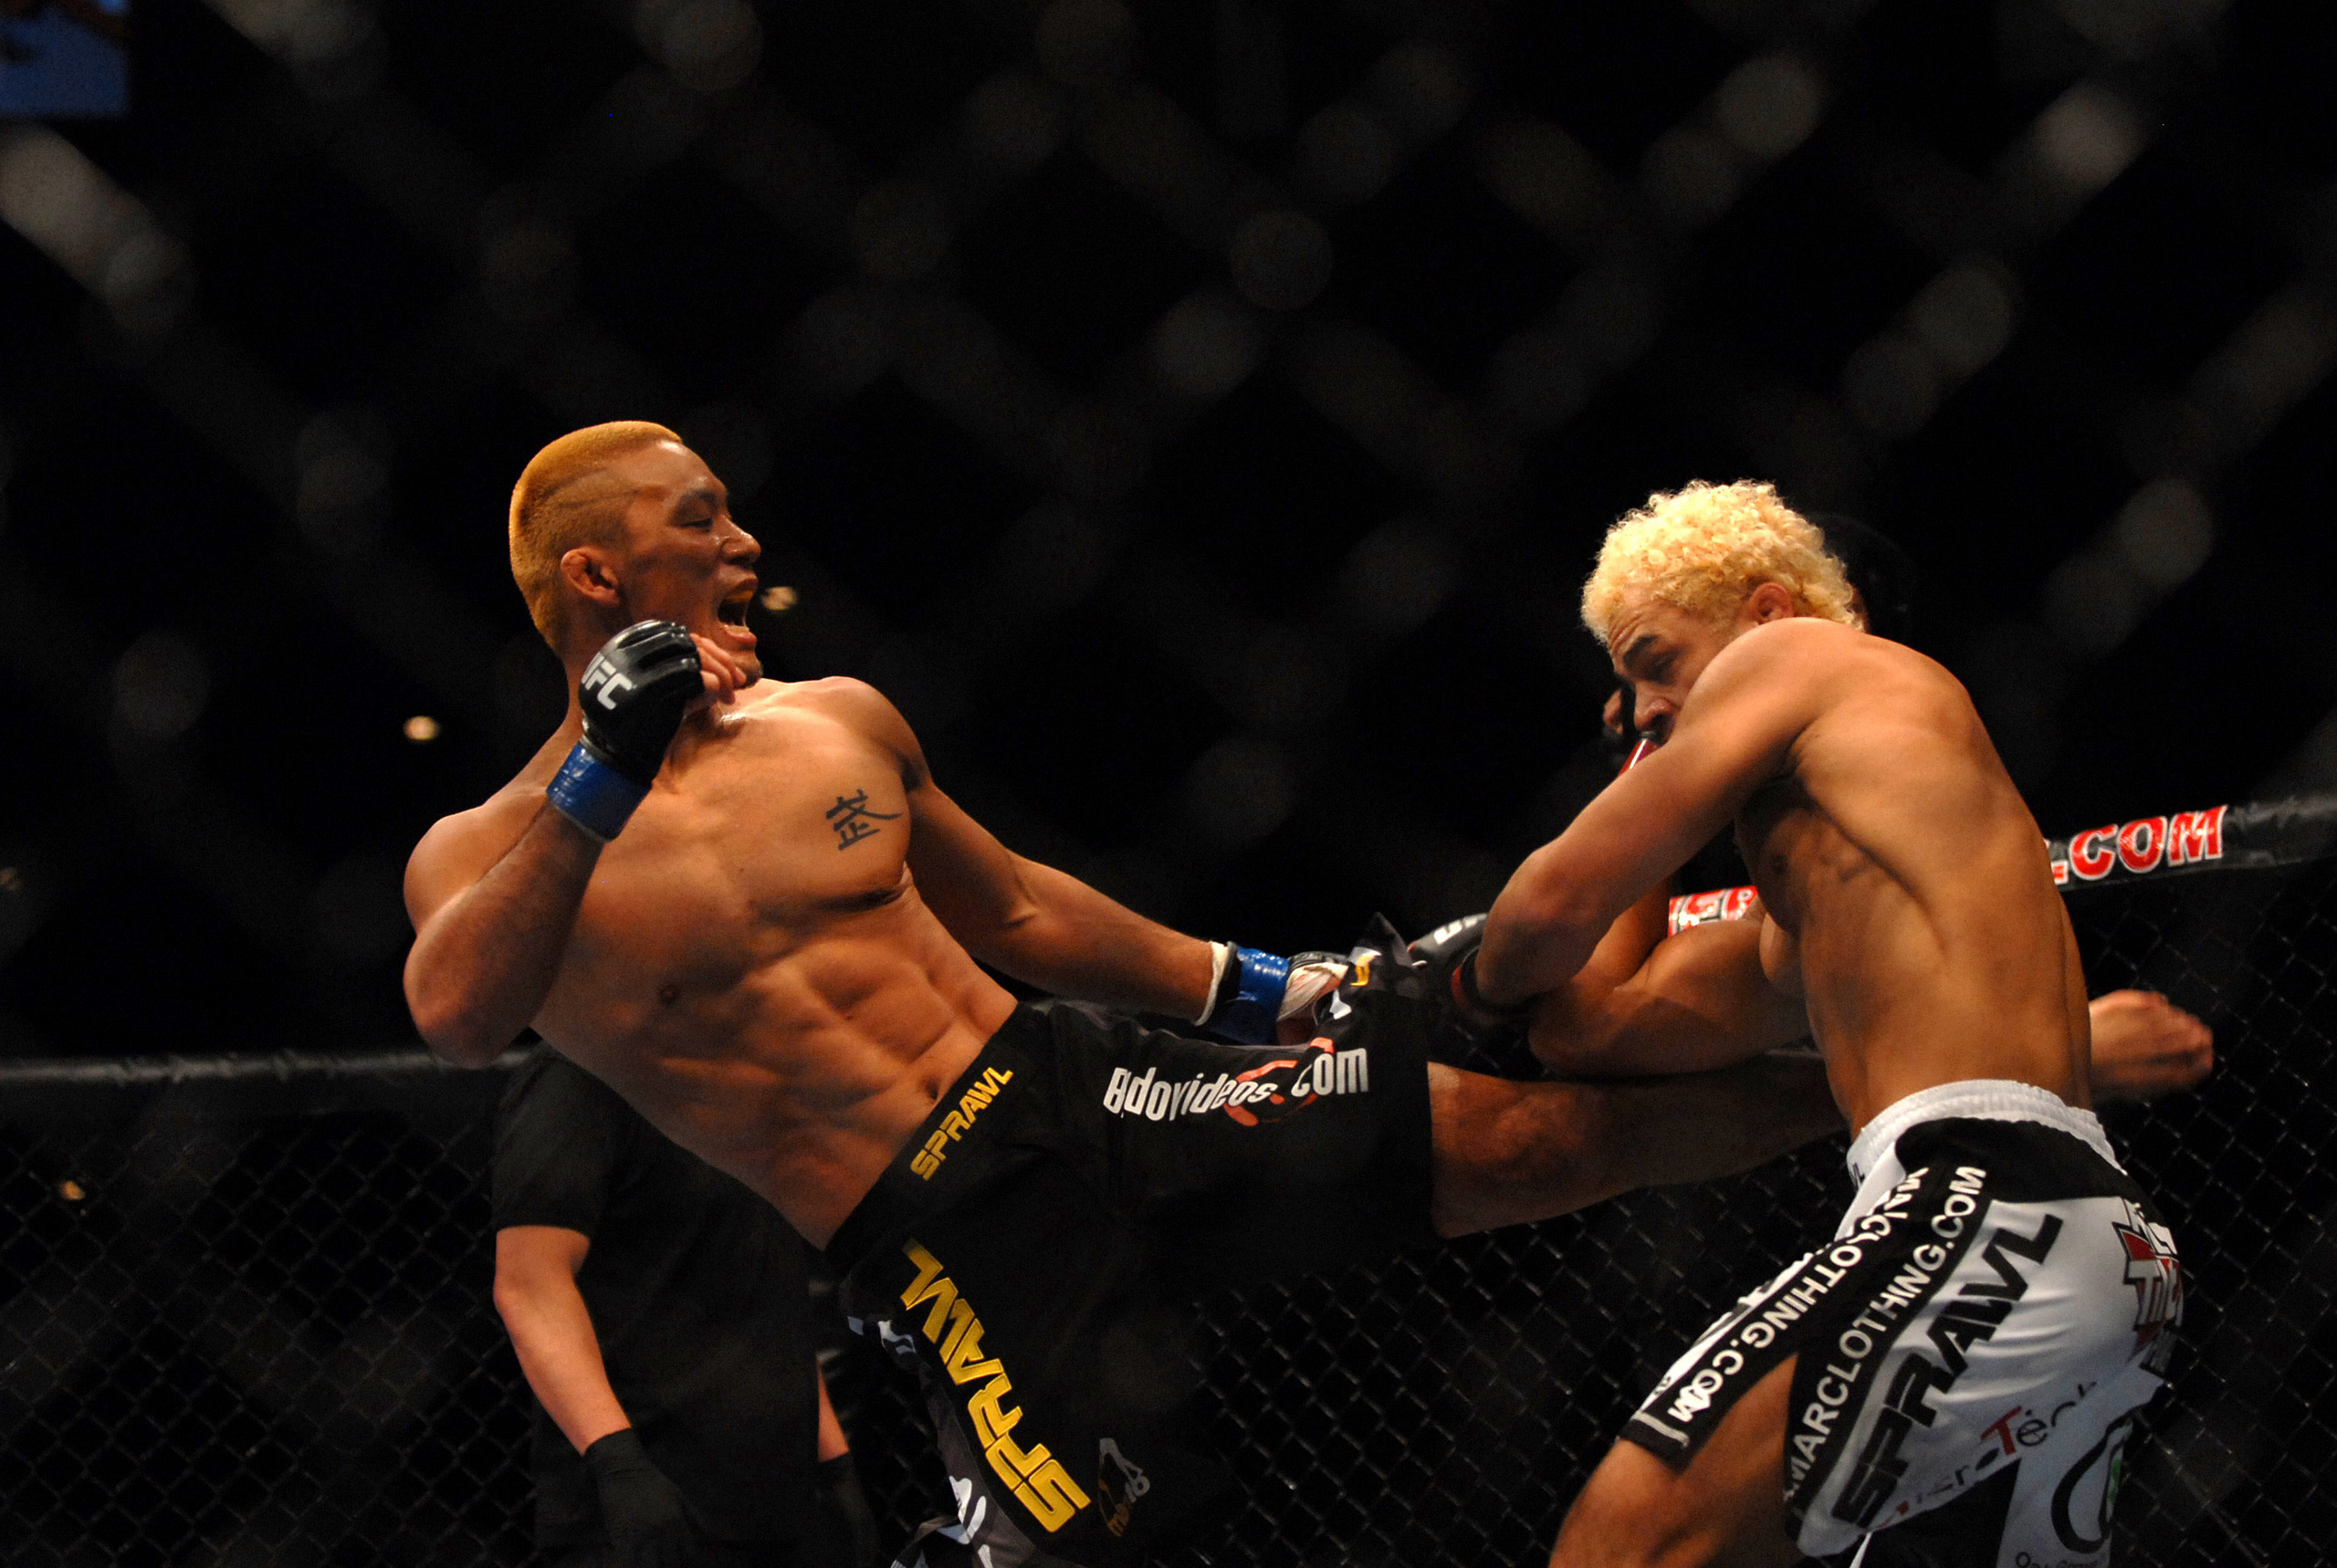 The Ultimate Fighter Image Ufc At Ft Bragg HD Wallpaper And